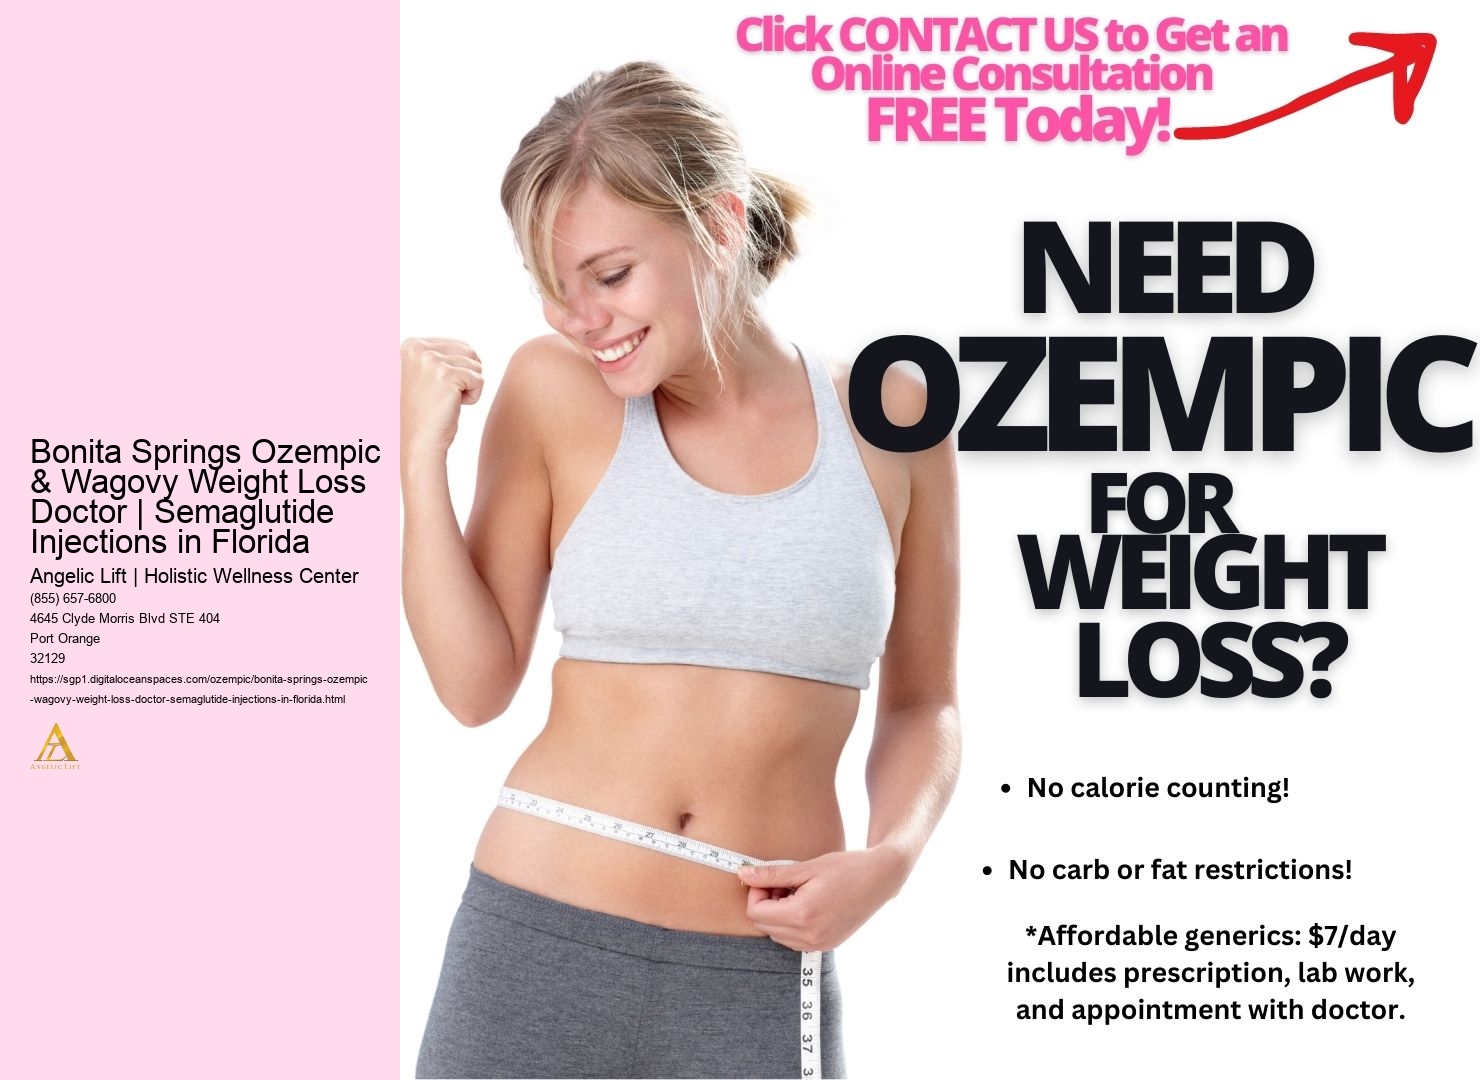 Bonita Springs Ozempic & Wagovy Weight Loss Doctor | Semaglutide Injections in Florida